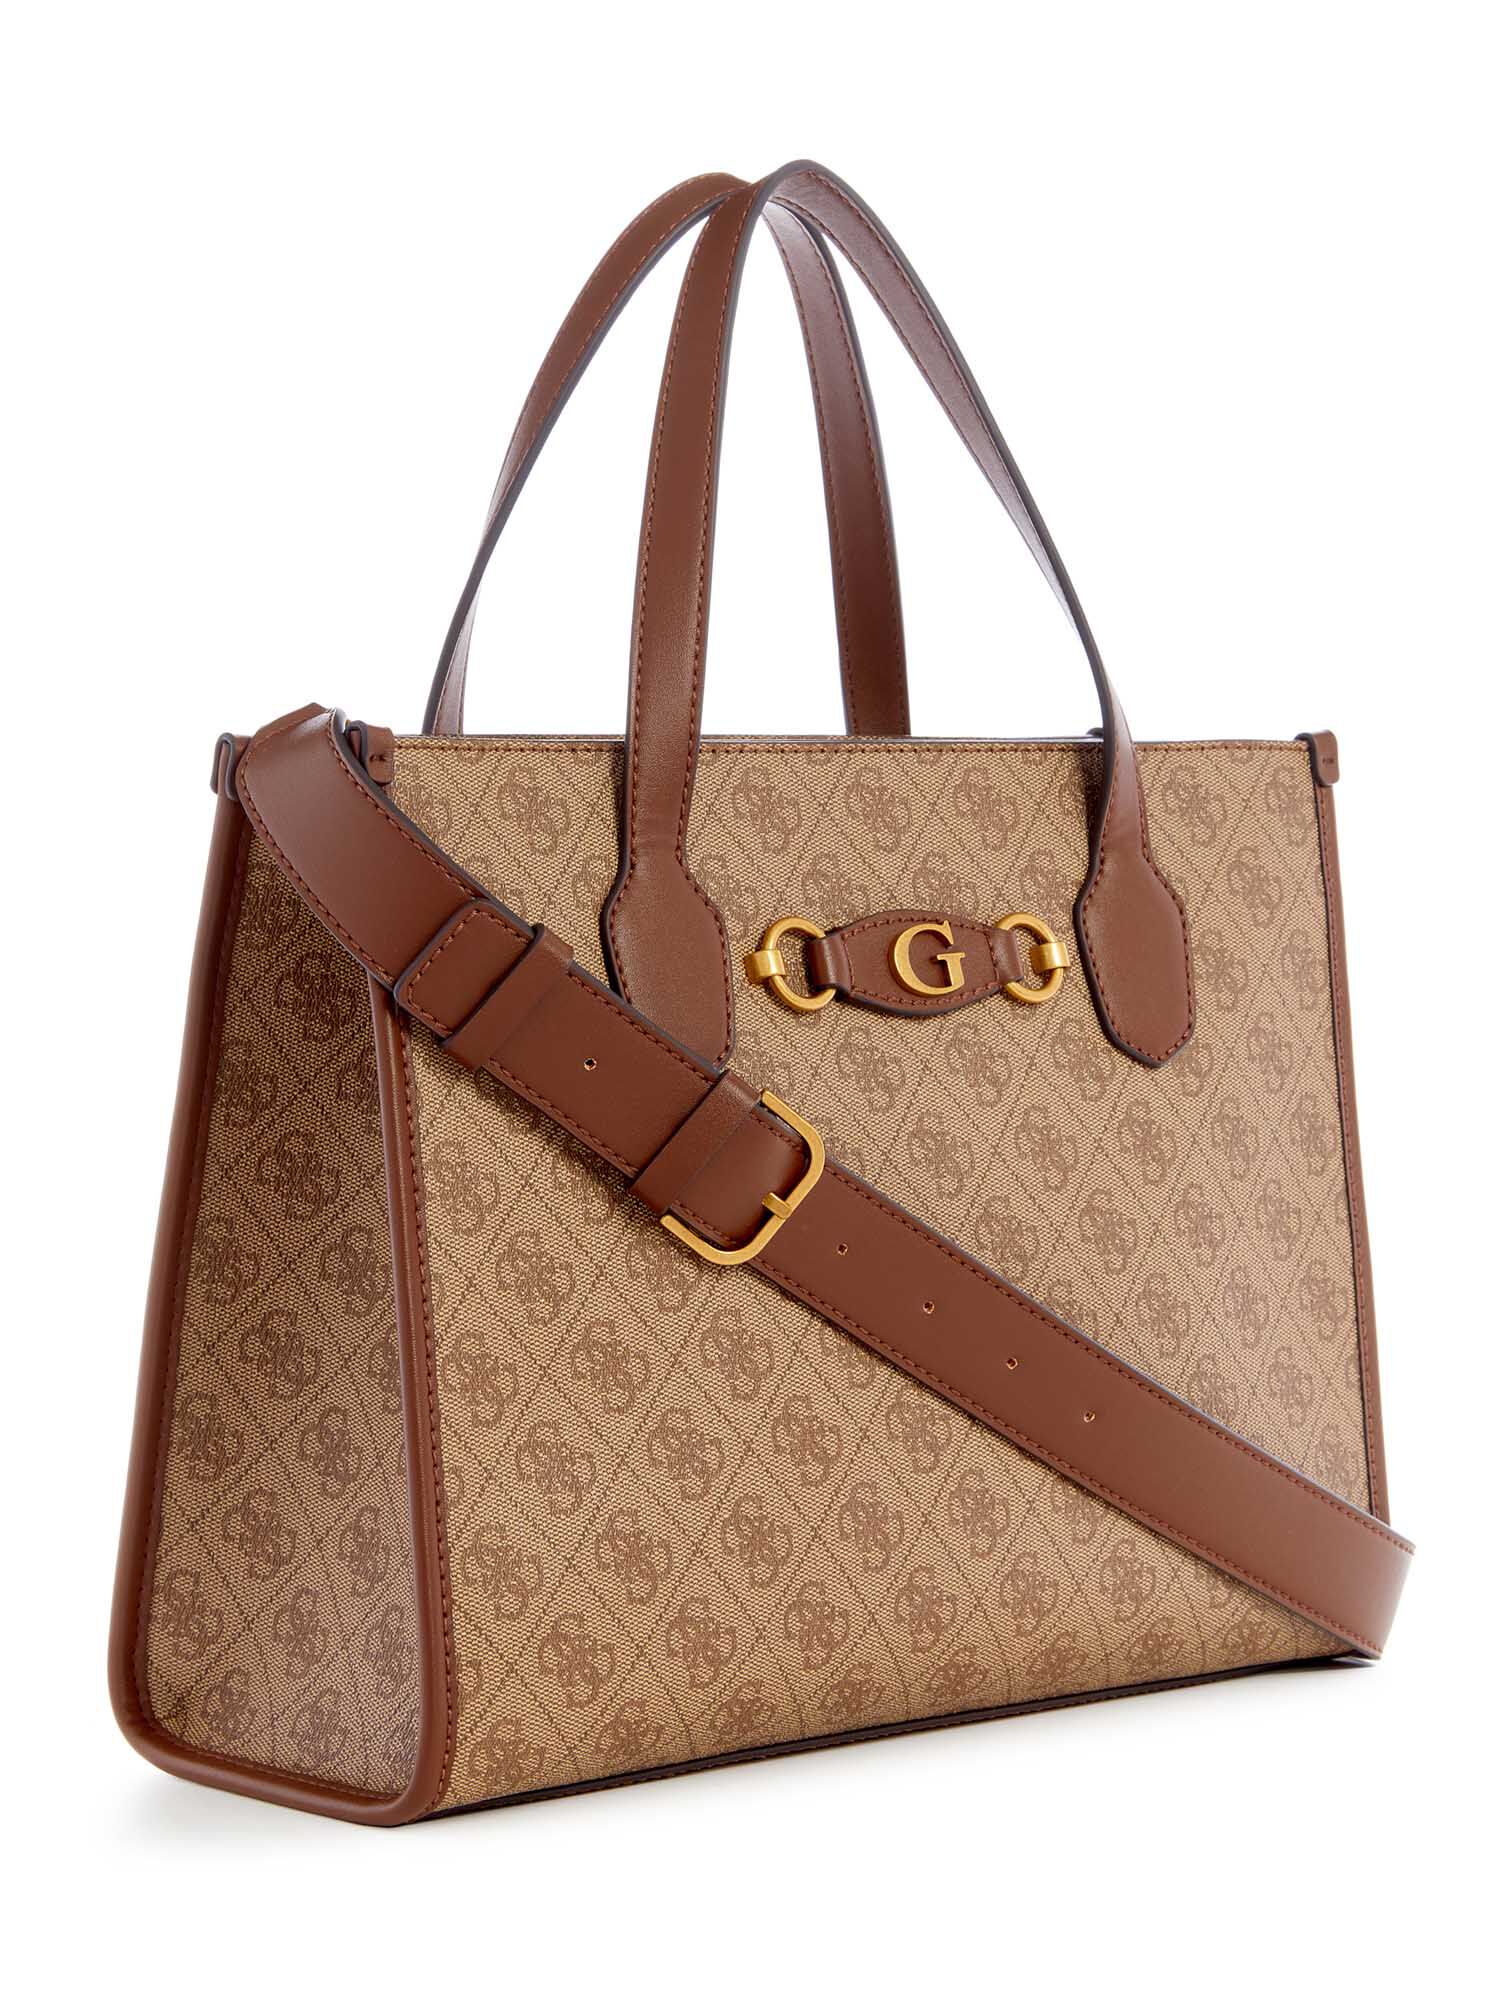 Shop GUESS Online Izzy 2 Compartment Tote